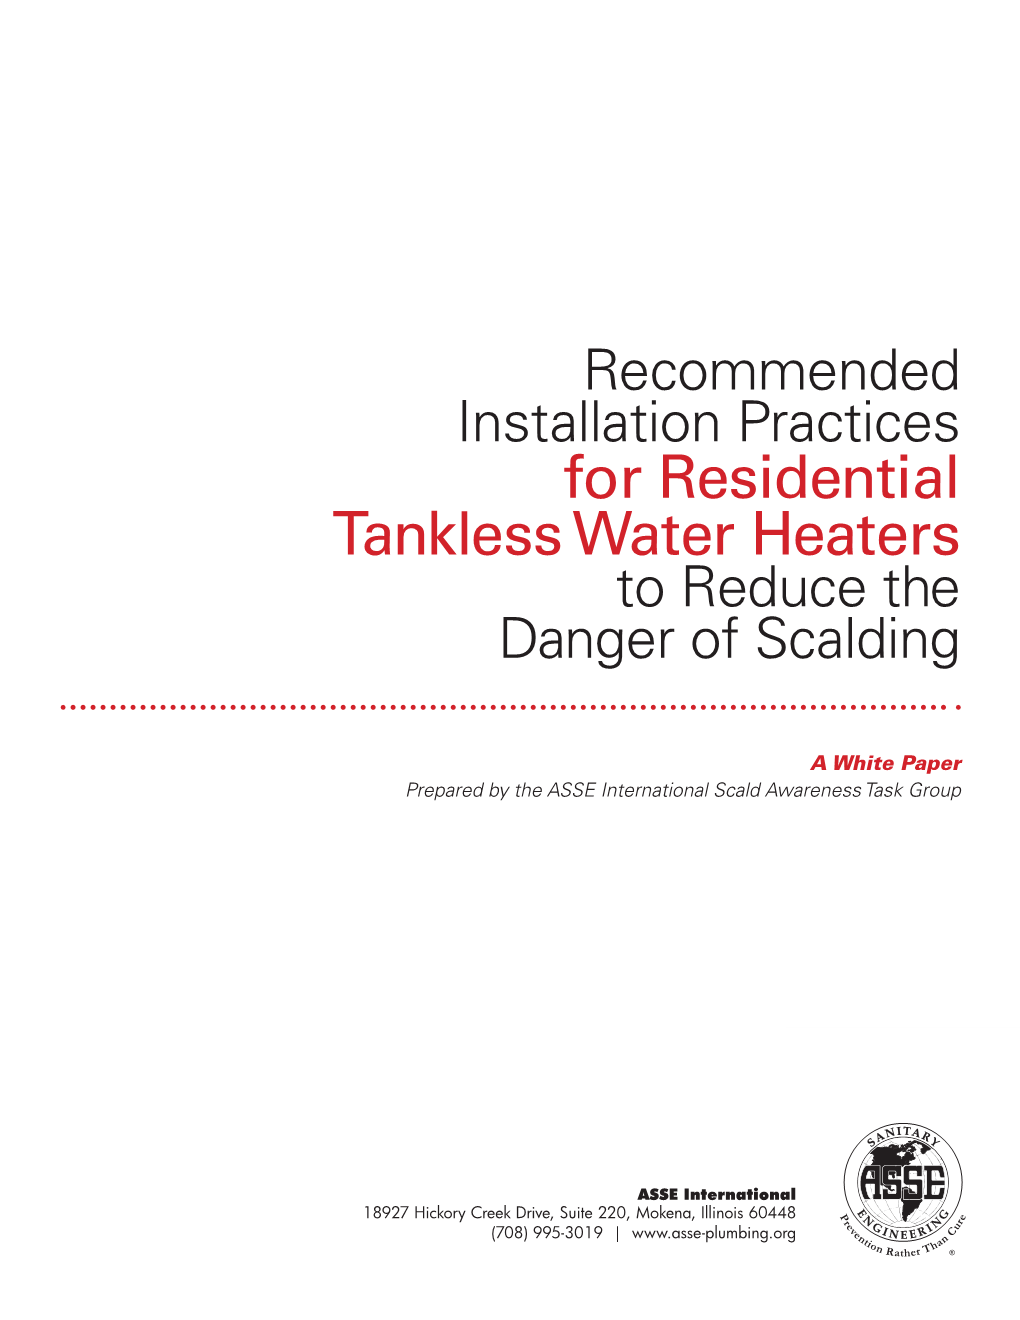 For Residential Tankless Water Heaters to Reduce the Danger of Scalding